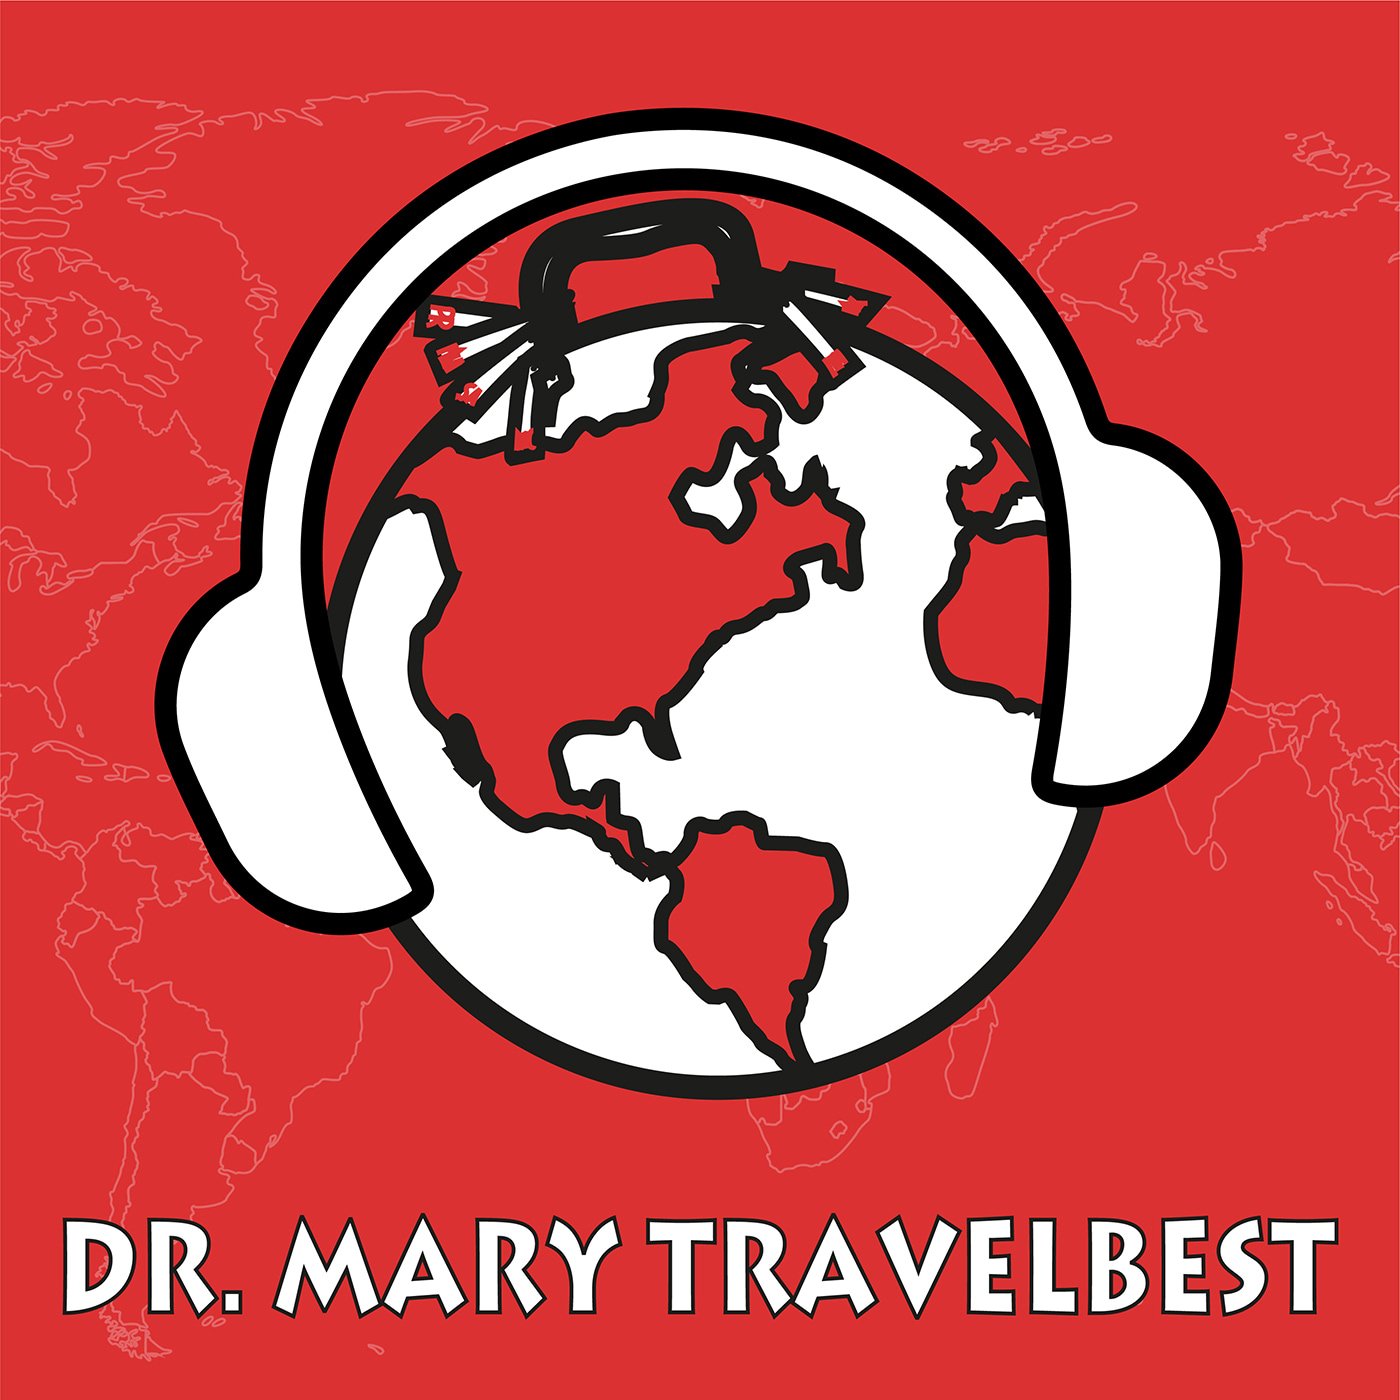 Dr. Mary Travelbest